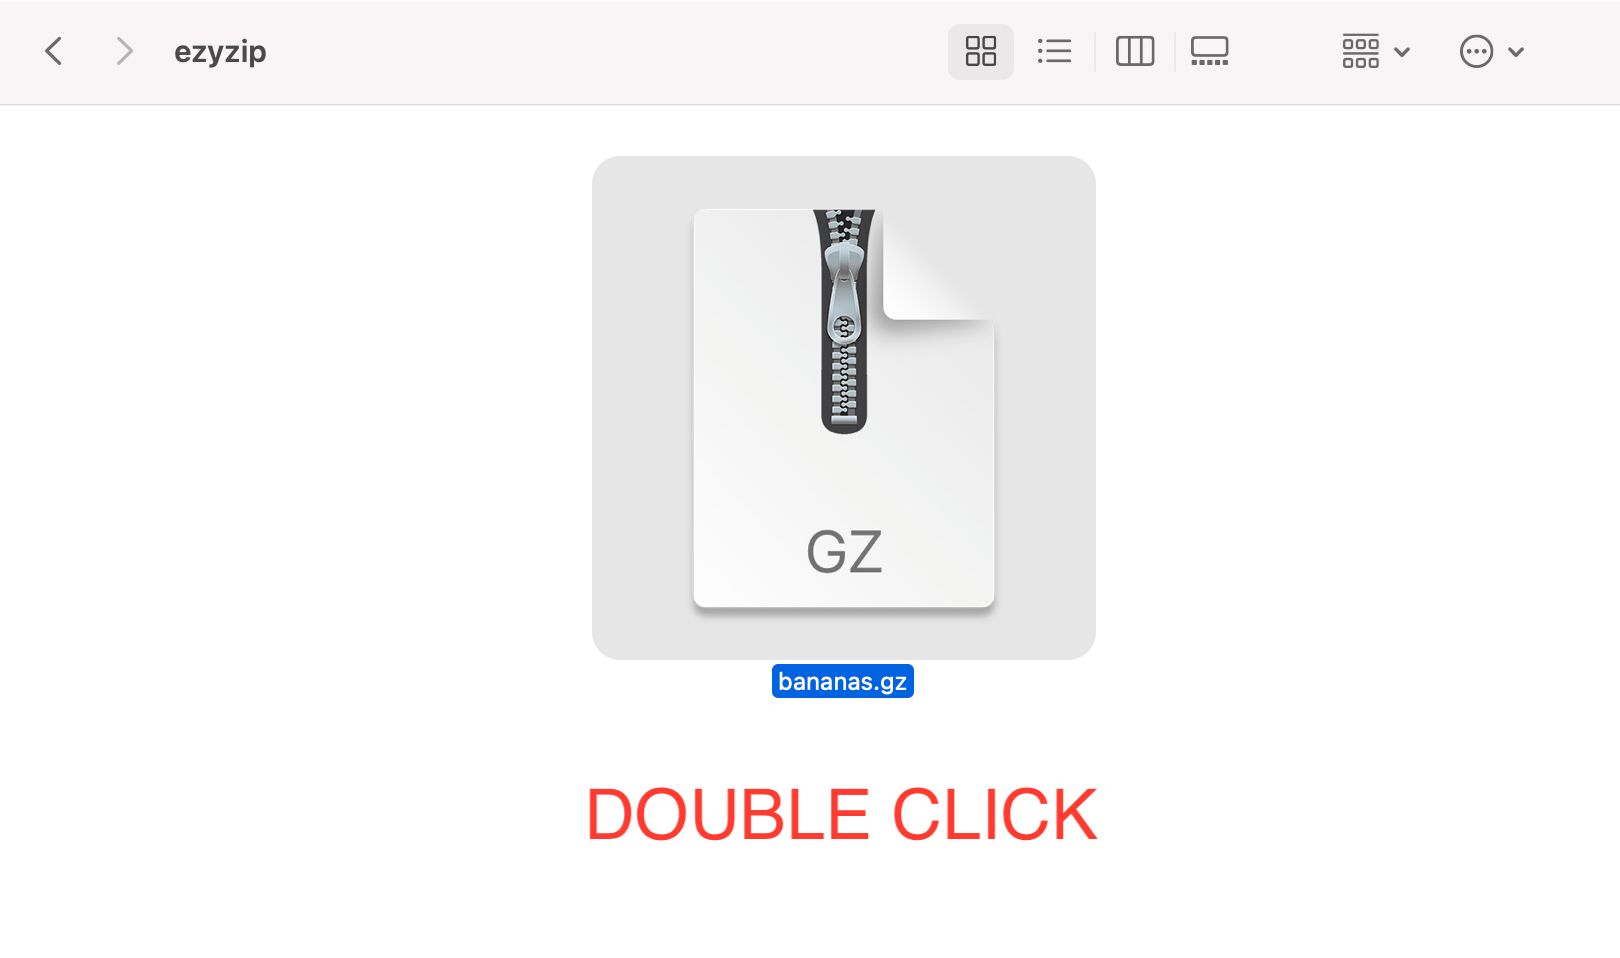 How To Open GZ Files on macOS: Step 1